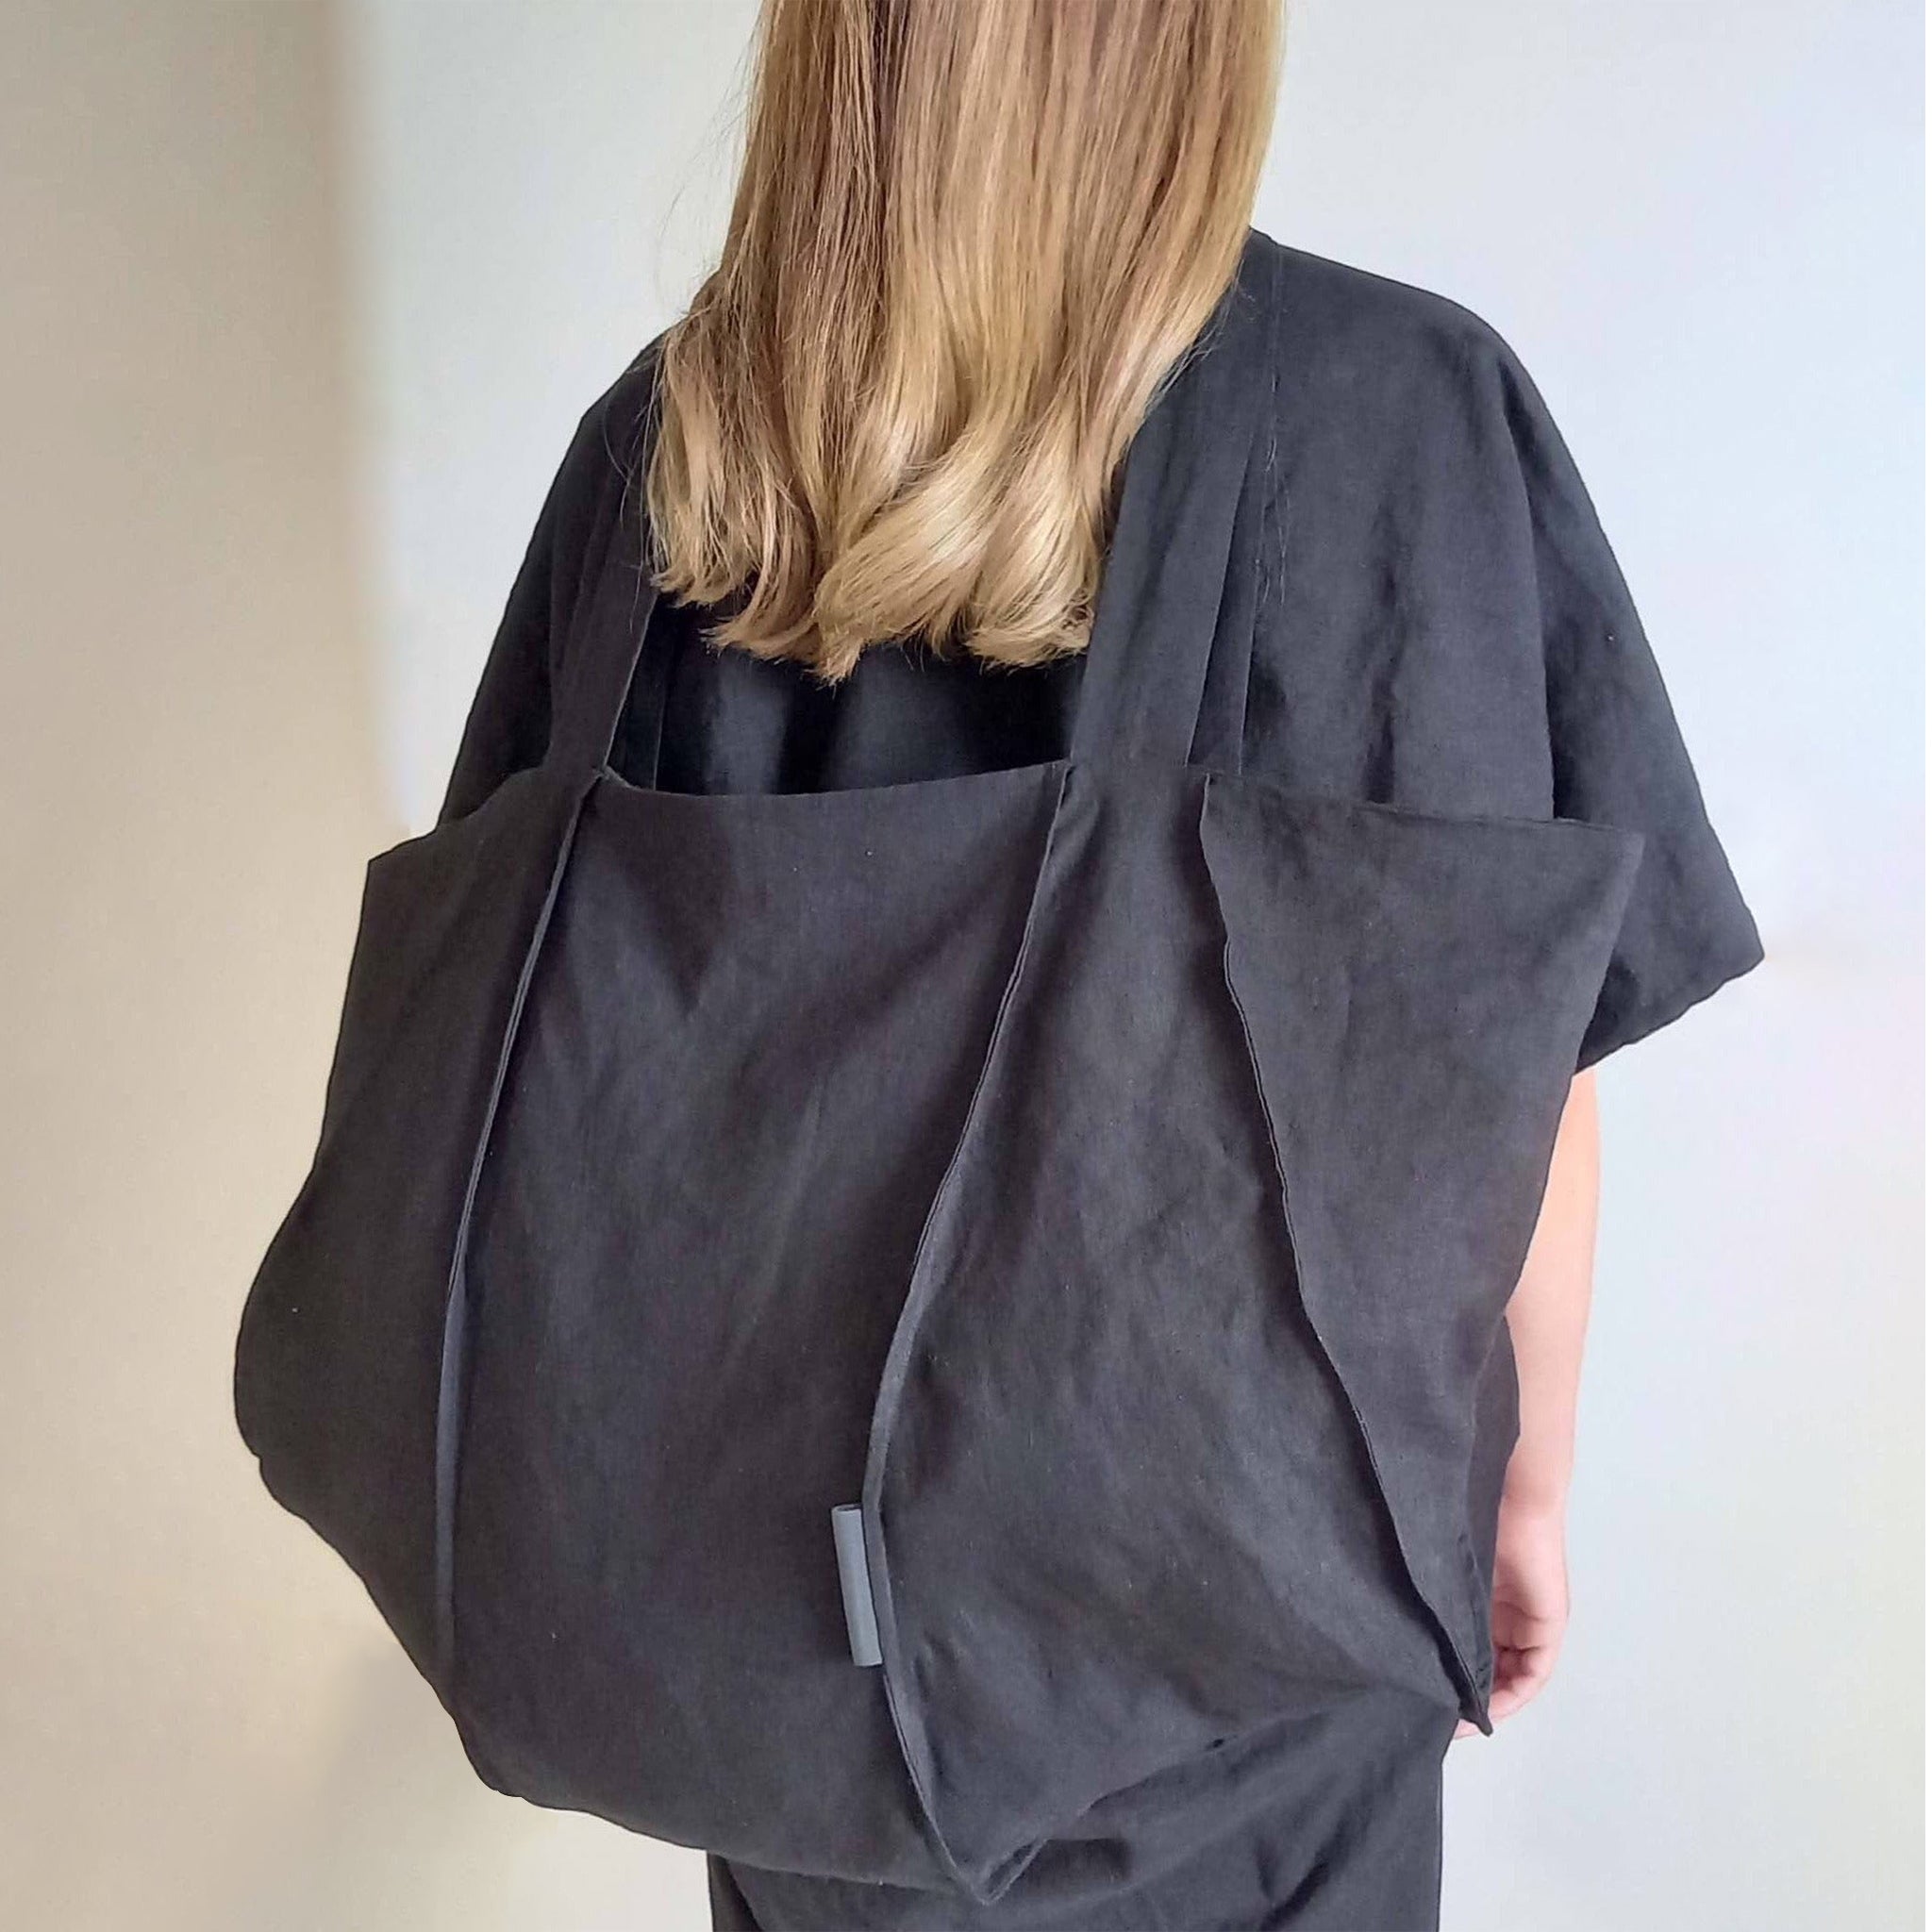 Woman wearing The Costume Room black Linen Tote Bag on her back